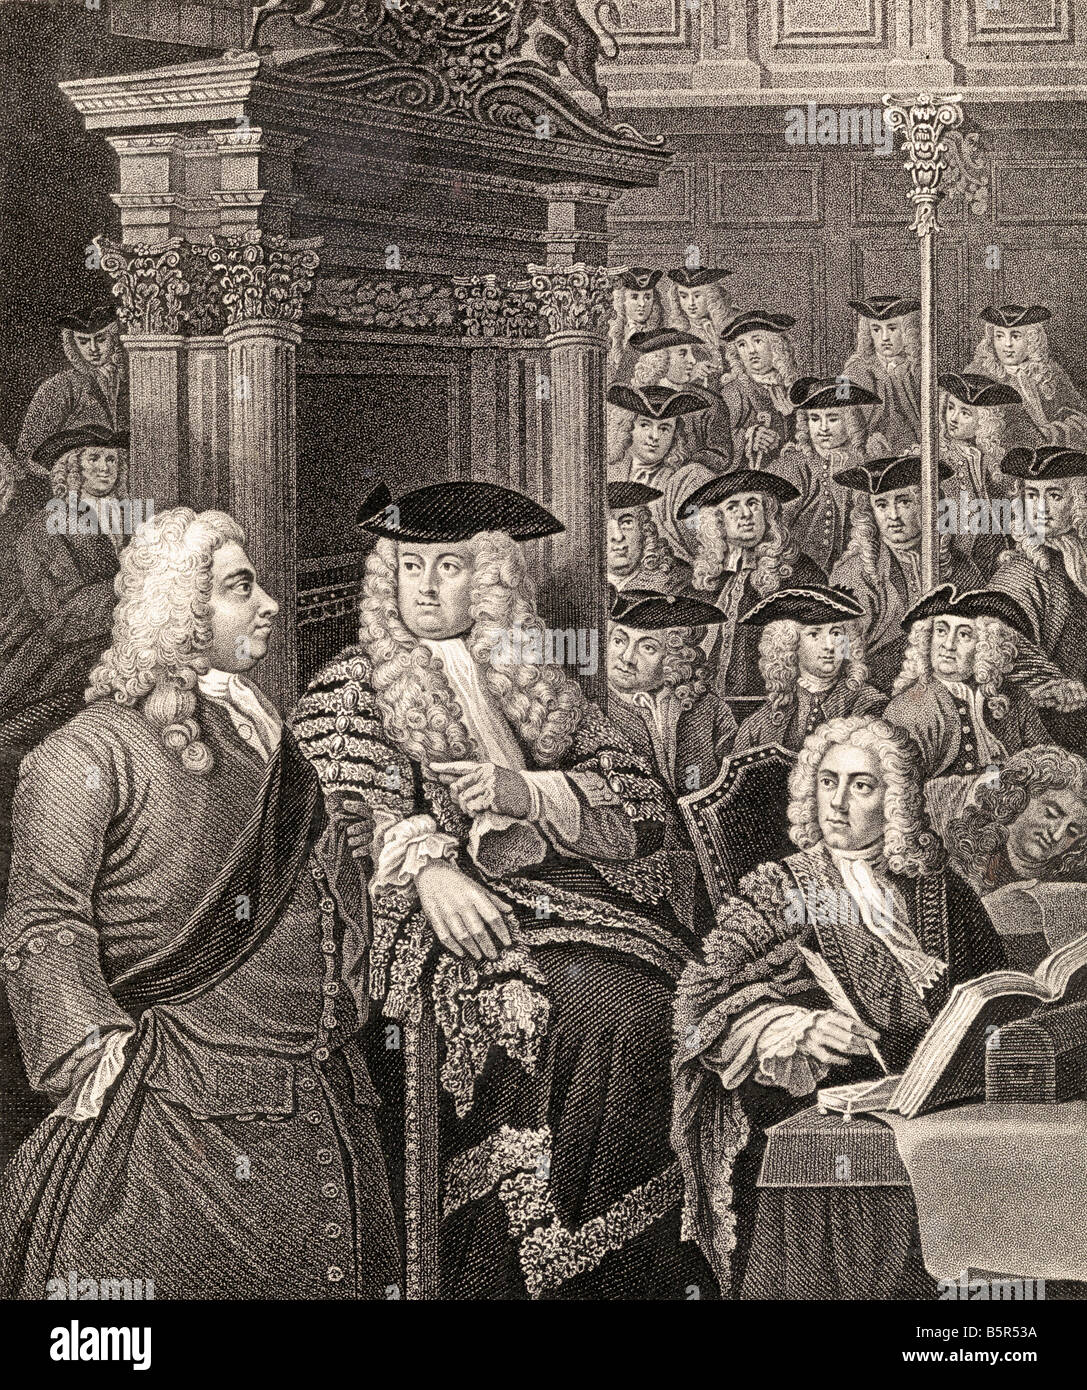 The House of Commons in Sir Robert Walpole's Administration. Presiding is Arthur Onslow, on his right Robert Walpole. Stock Photo